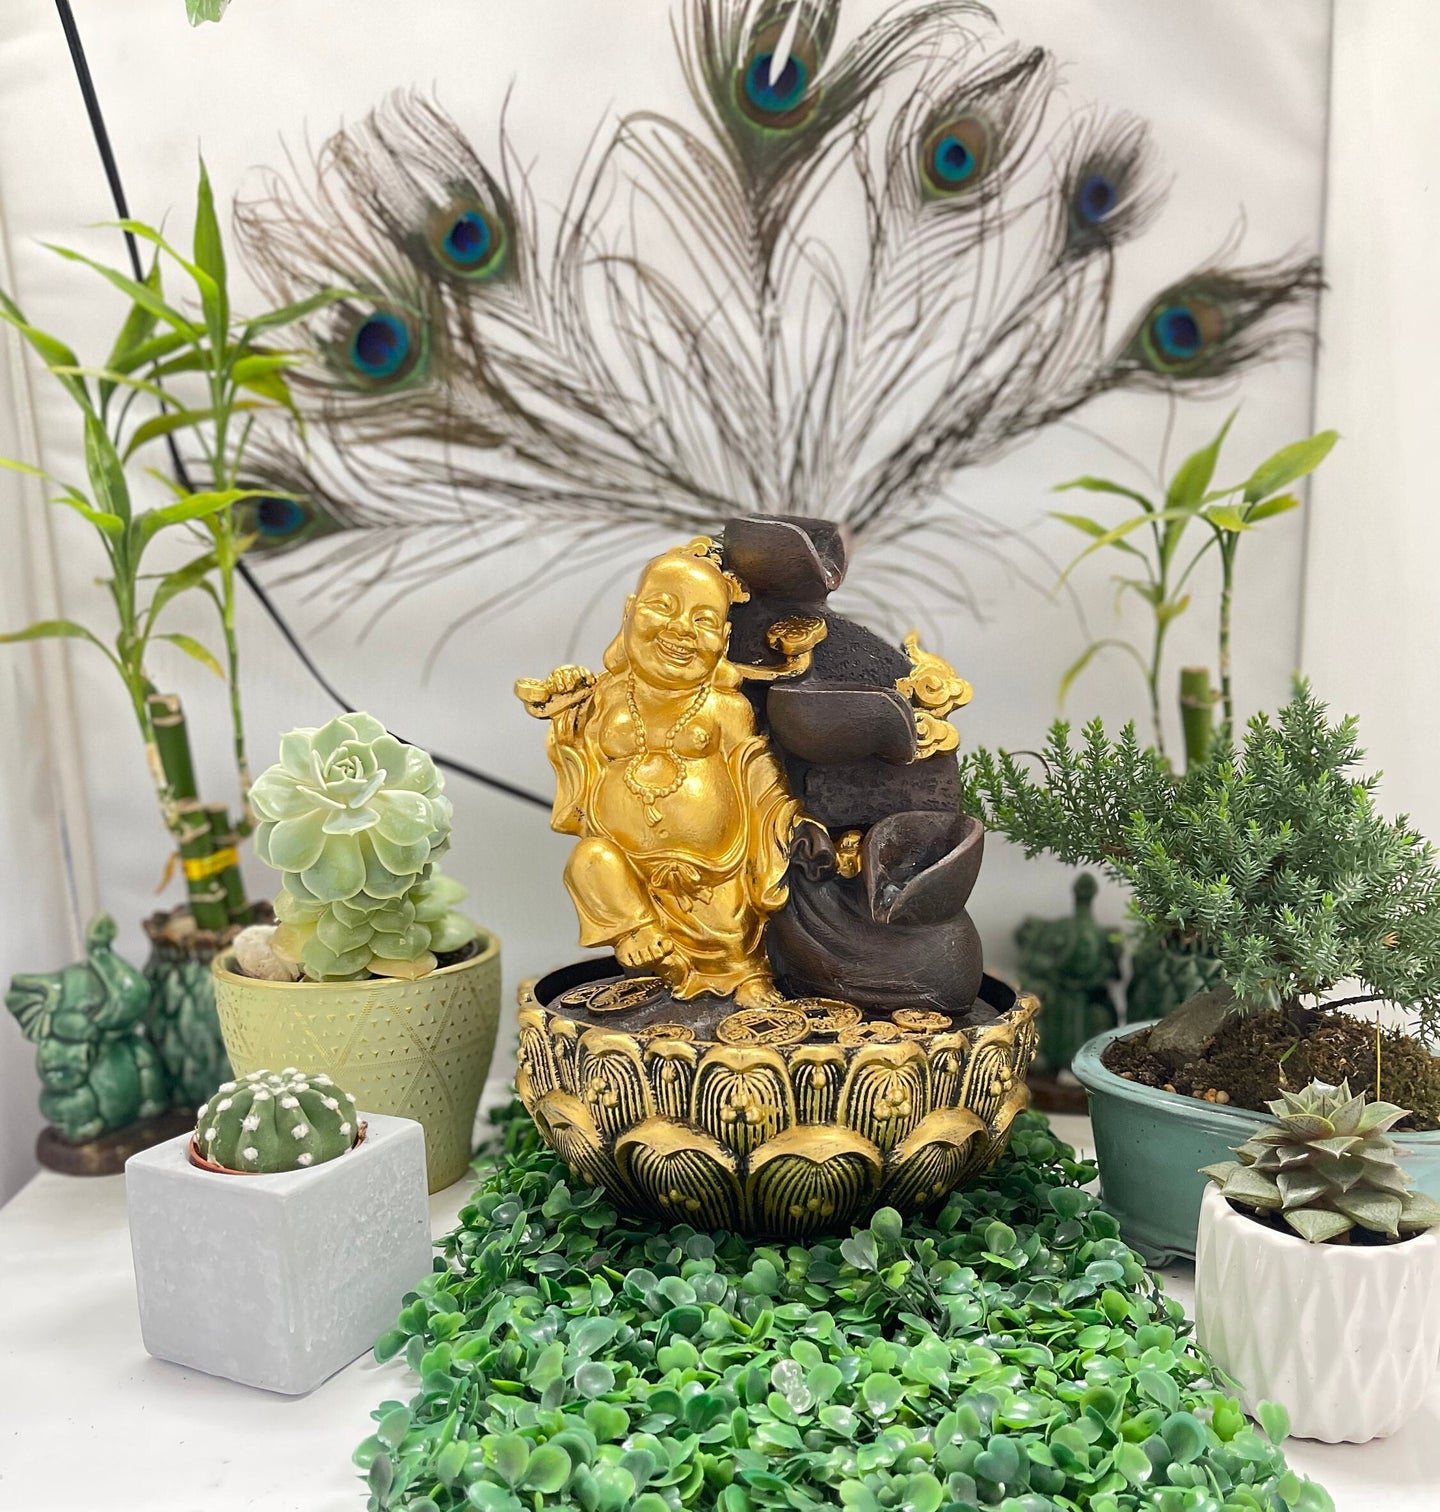 Hand Made Buddha Statue Decorative Fountains Indoor Water Fountains Resin Crafts Gifts Feng-Shui Desktop Home Fountain